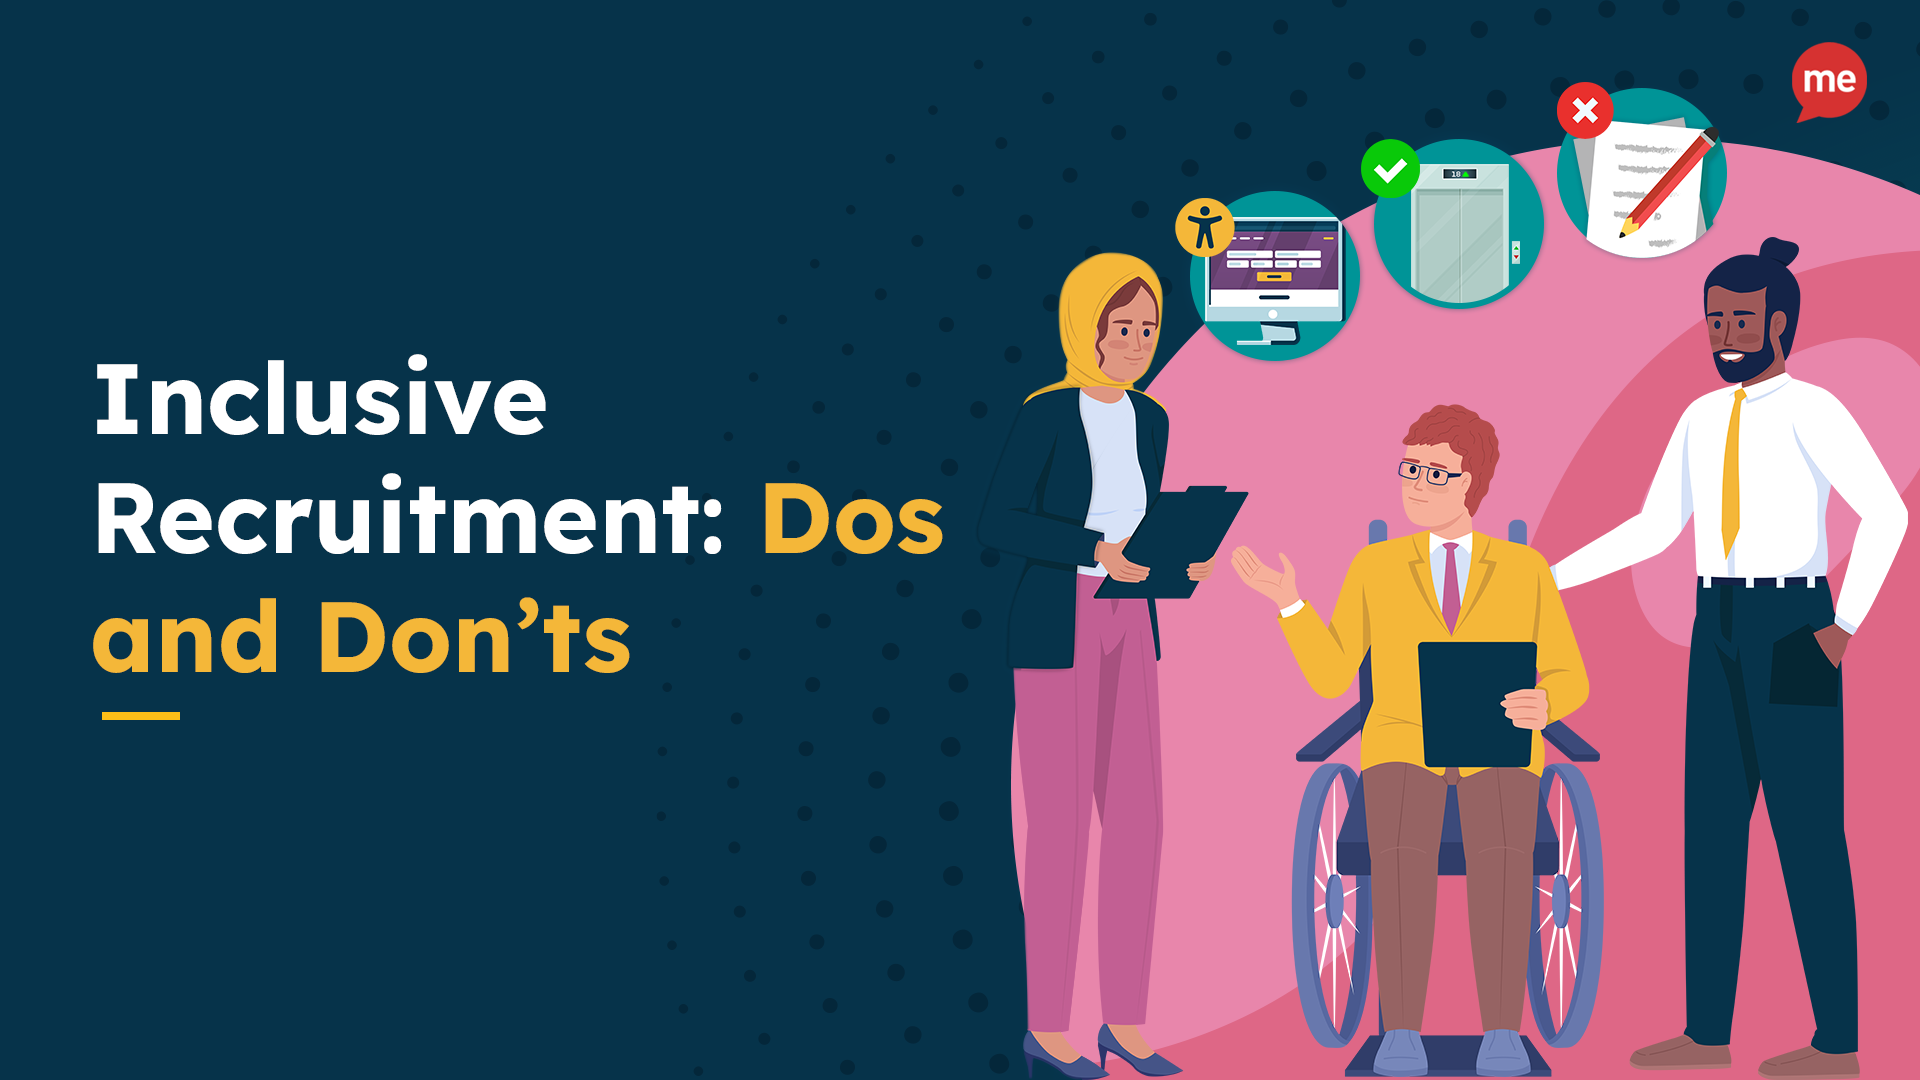 Inclusive Recruitment: Dos and Don’ts